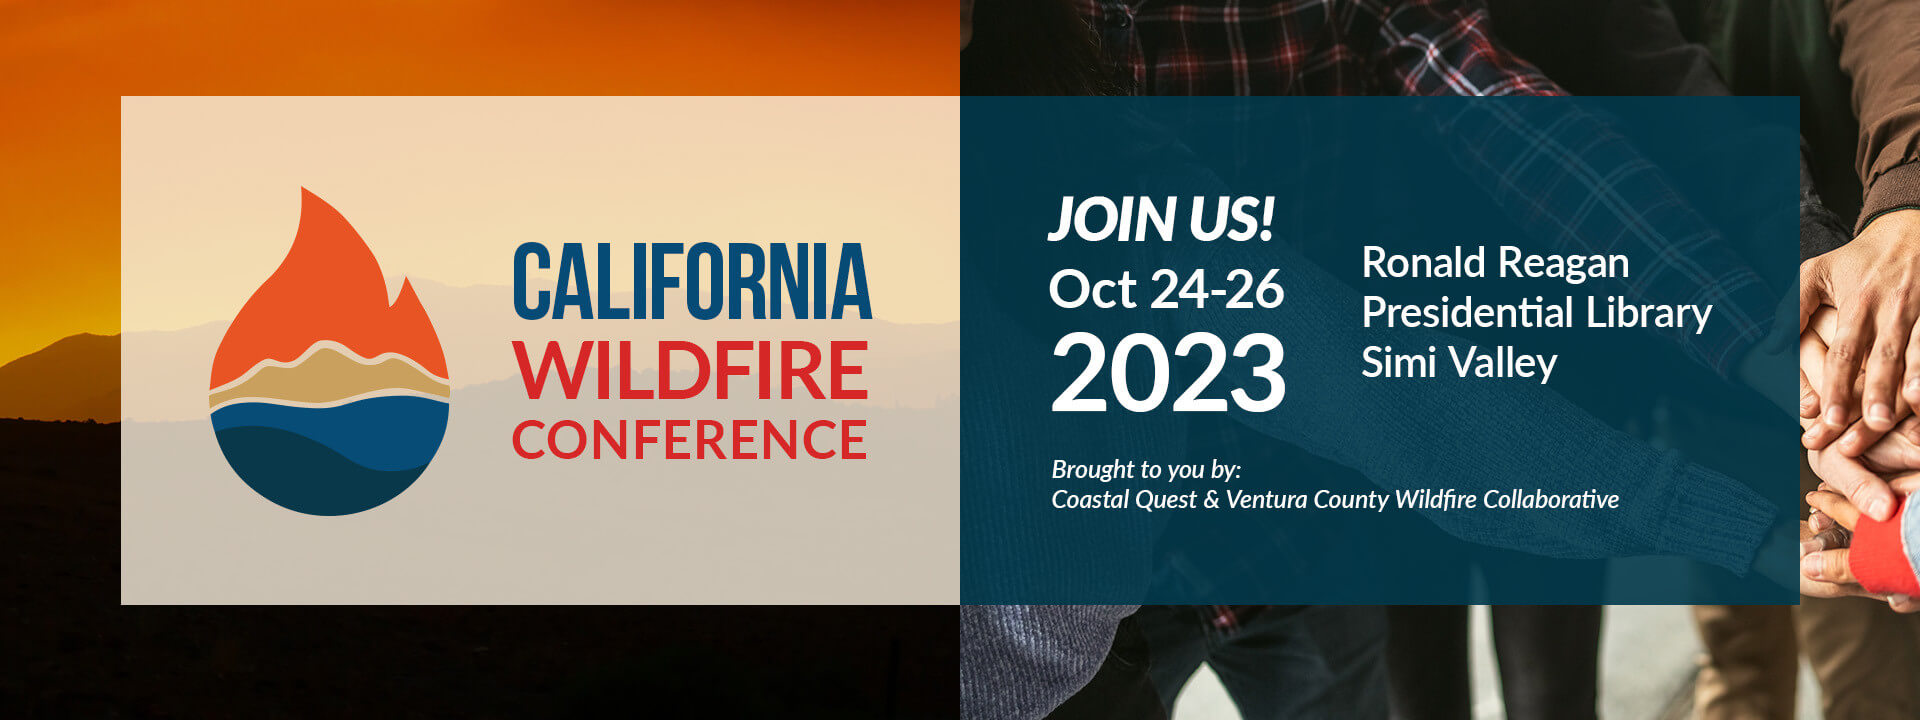 California Wildfire Conference October 24-26